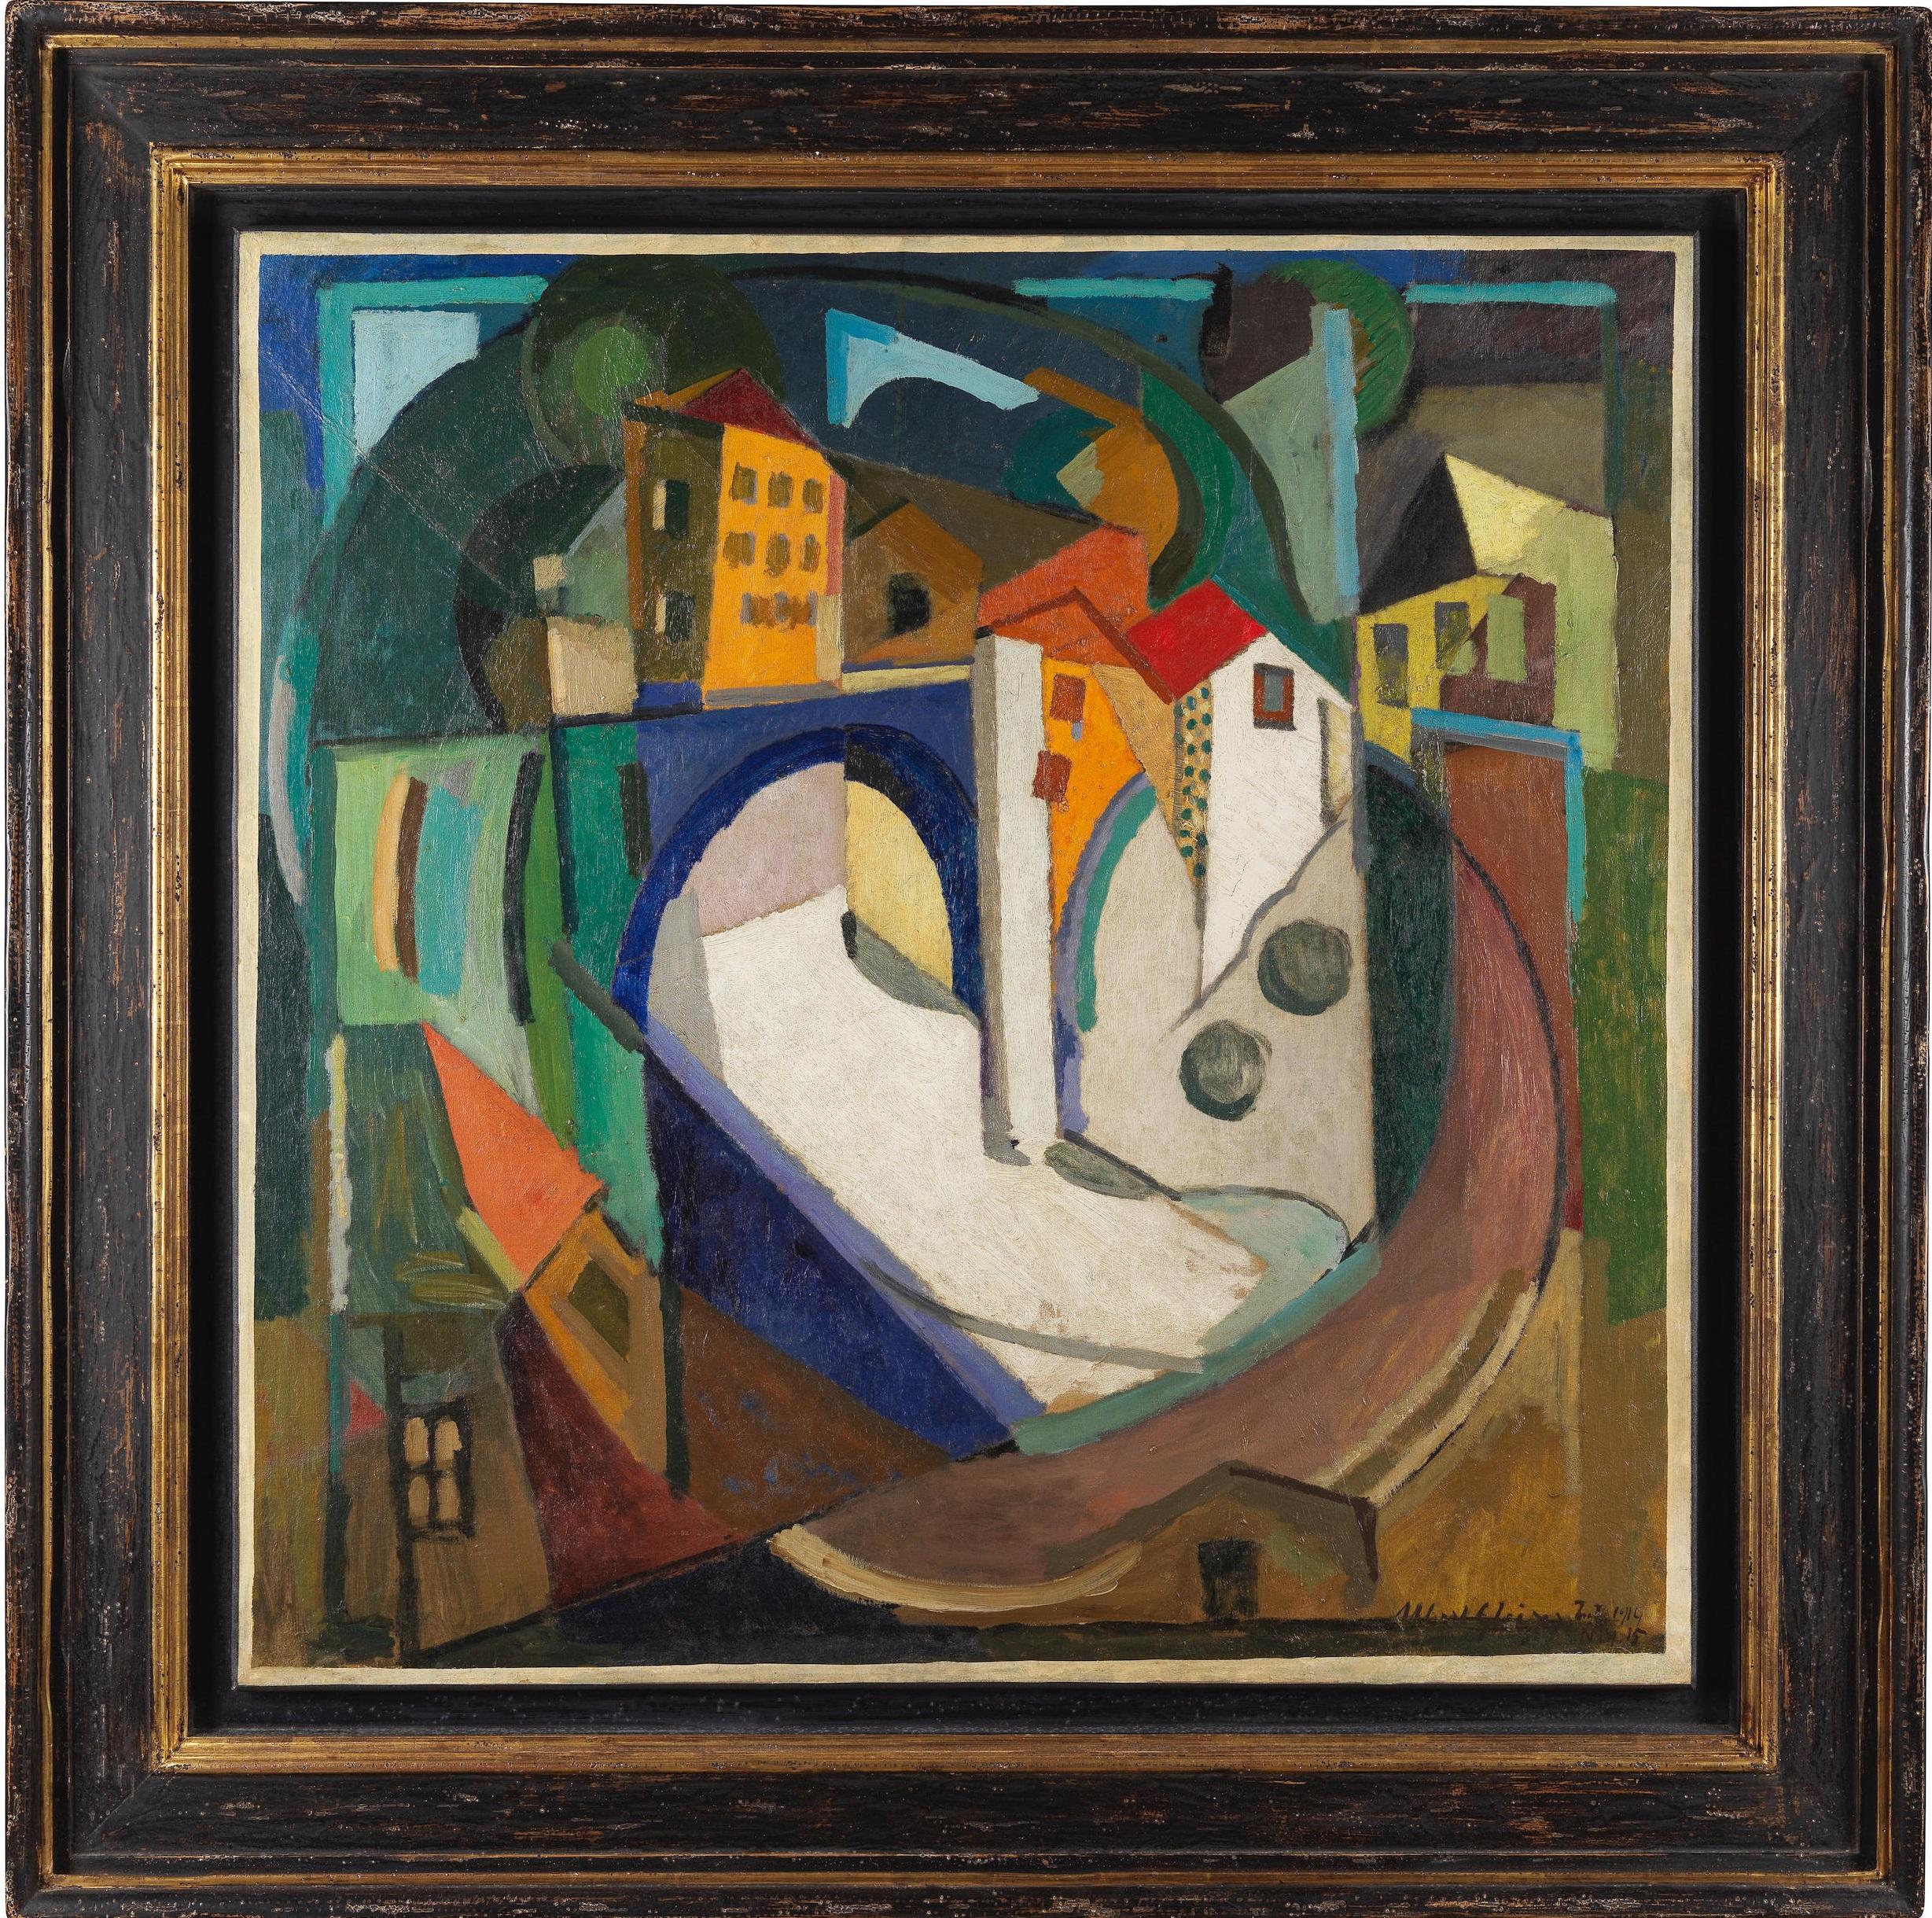 Mobilized in 1914, like many of his Cubist friends, Albert Gleizes was sent to a barracks in Toul, Lorraine, near the front line. Supported by a military doctor, Major Lambert, of whom he would paint an important portrait (now at the Guggenheim